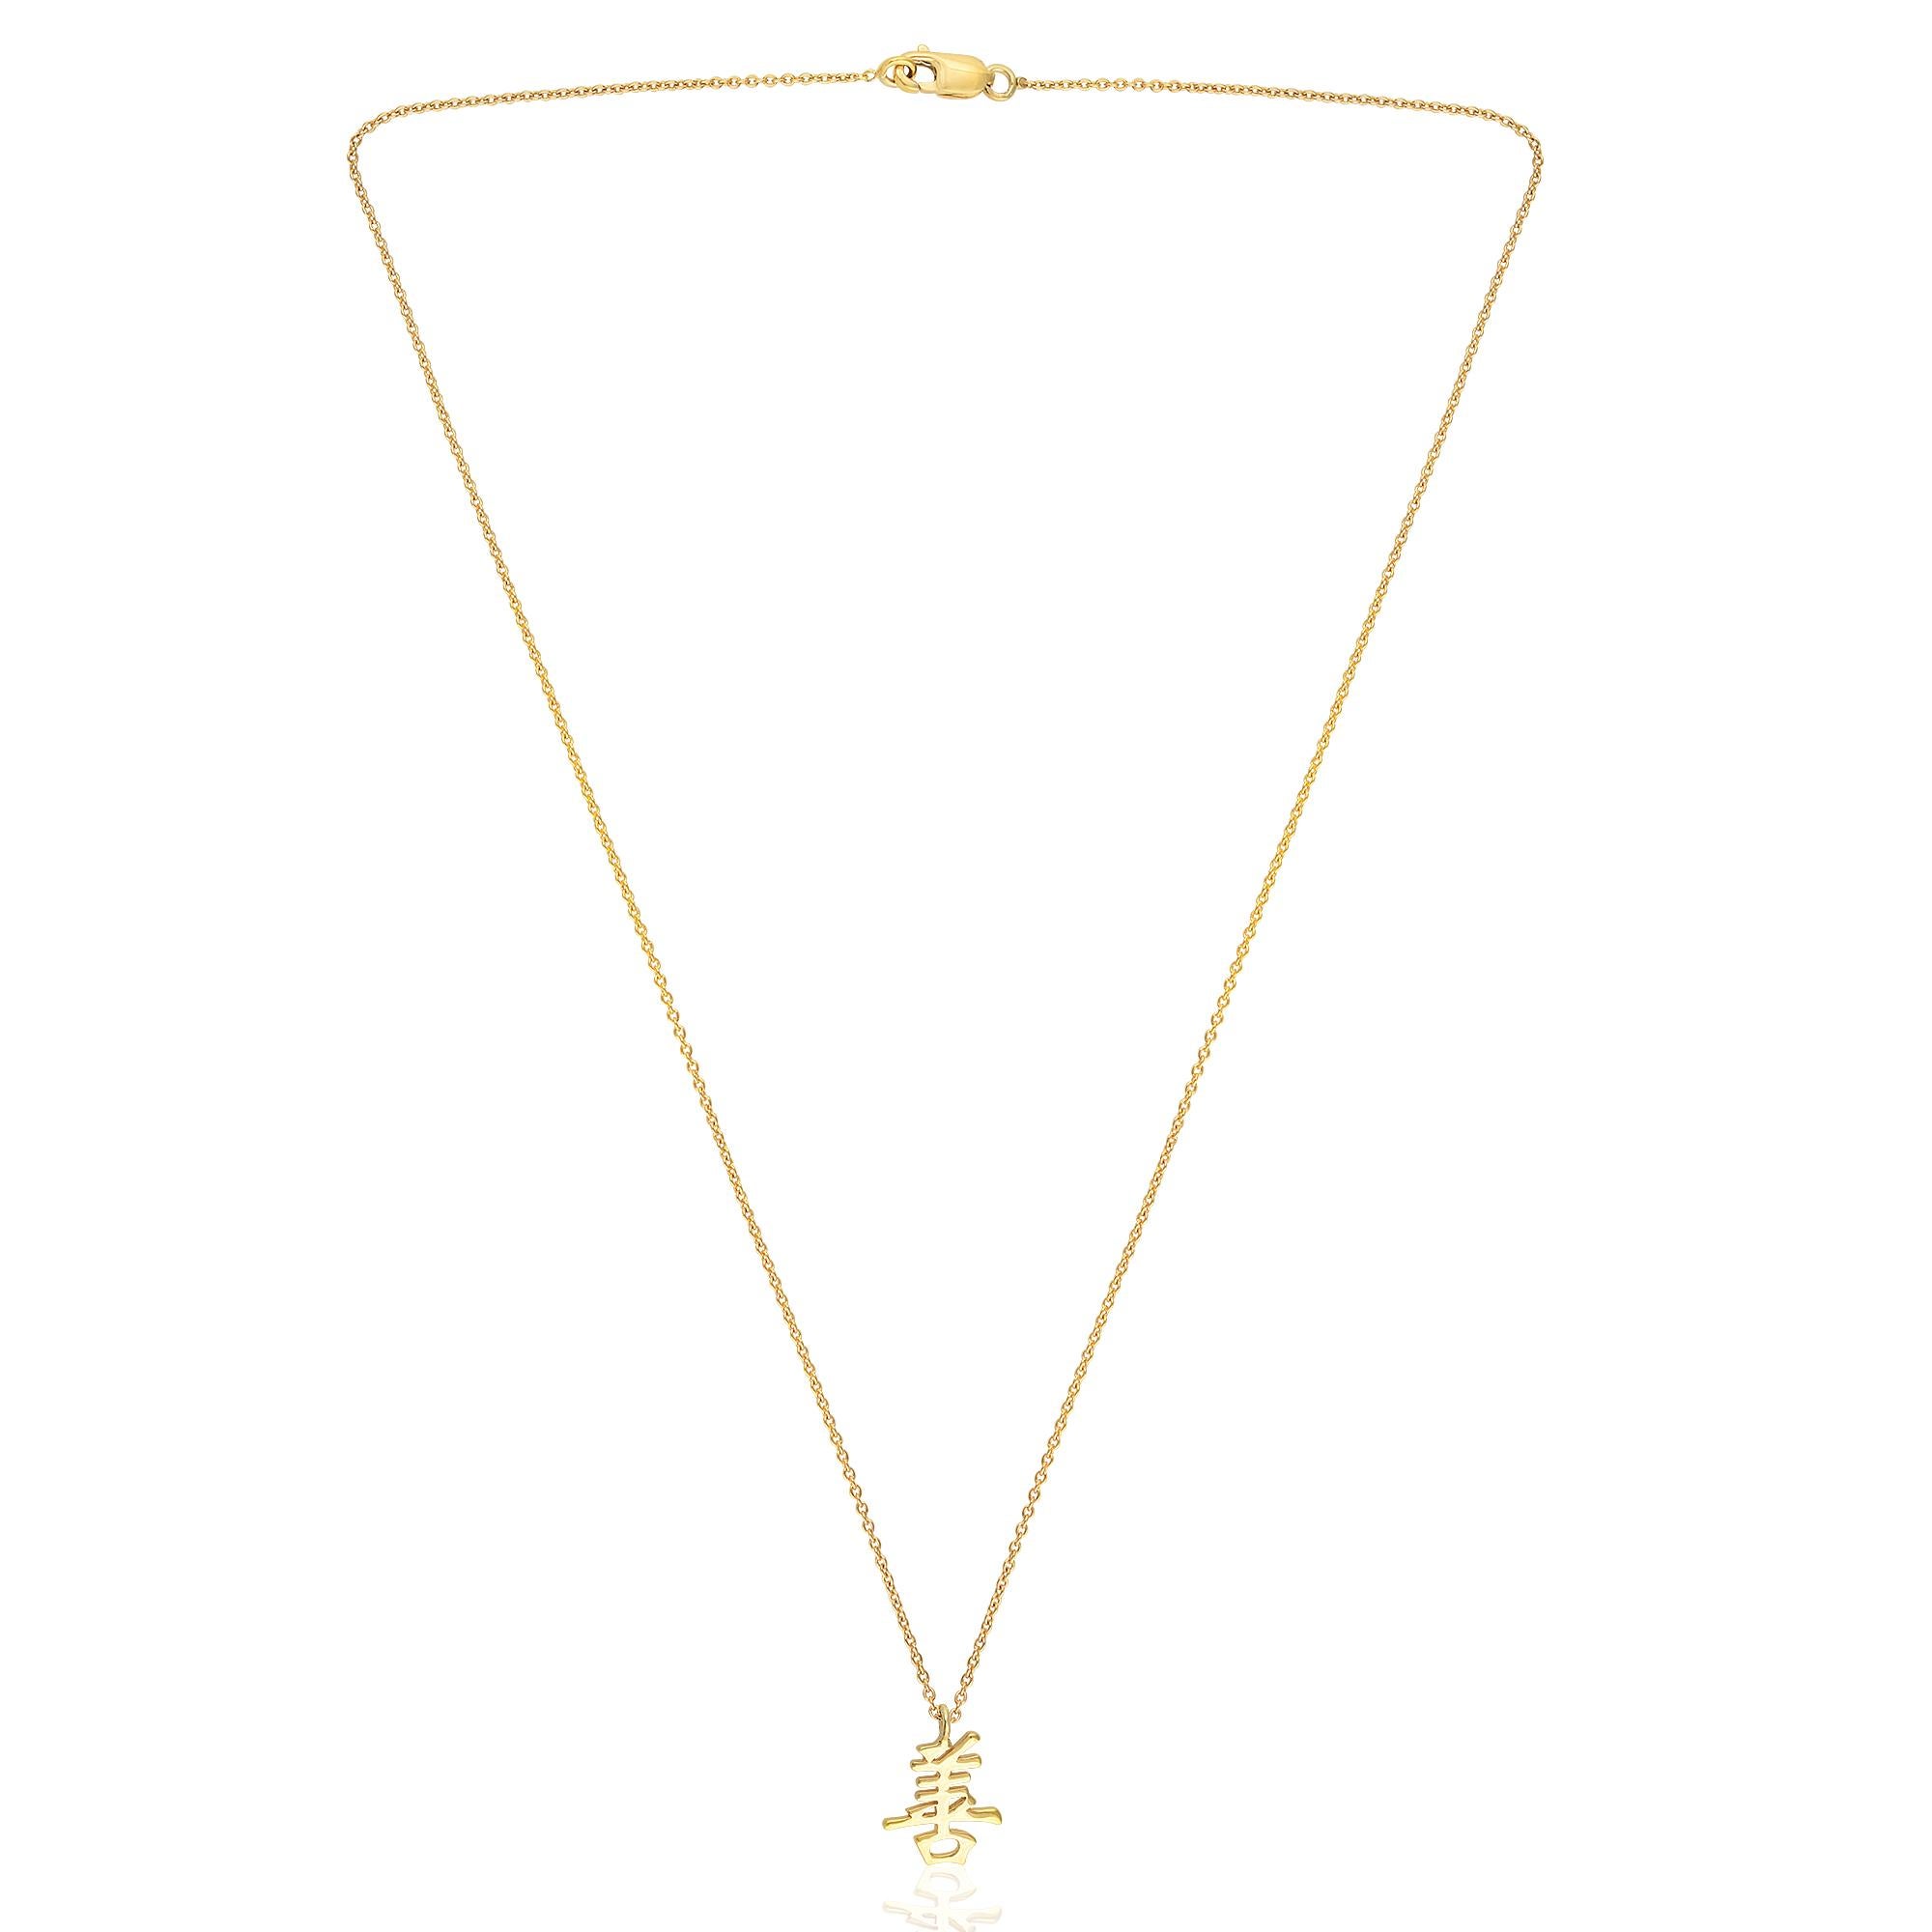 14k Yellow Gold Japanese Virtue Symbol Lucky Charm Pendant Necklace, a meaningful and elegant piece of fine jewelry that embodies the spirit of virtue and good fortune. Meticulously crafted with exceptional artistry, this necklace features a pendant